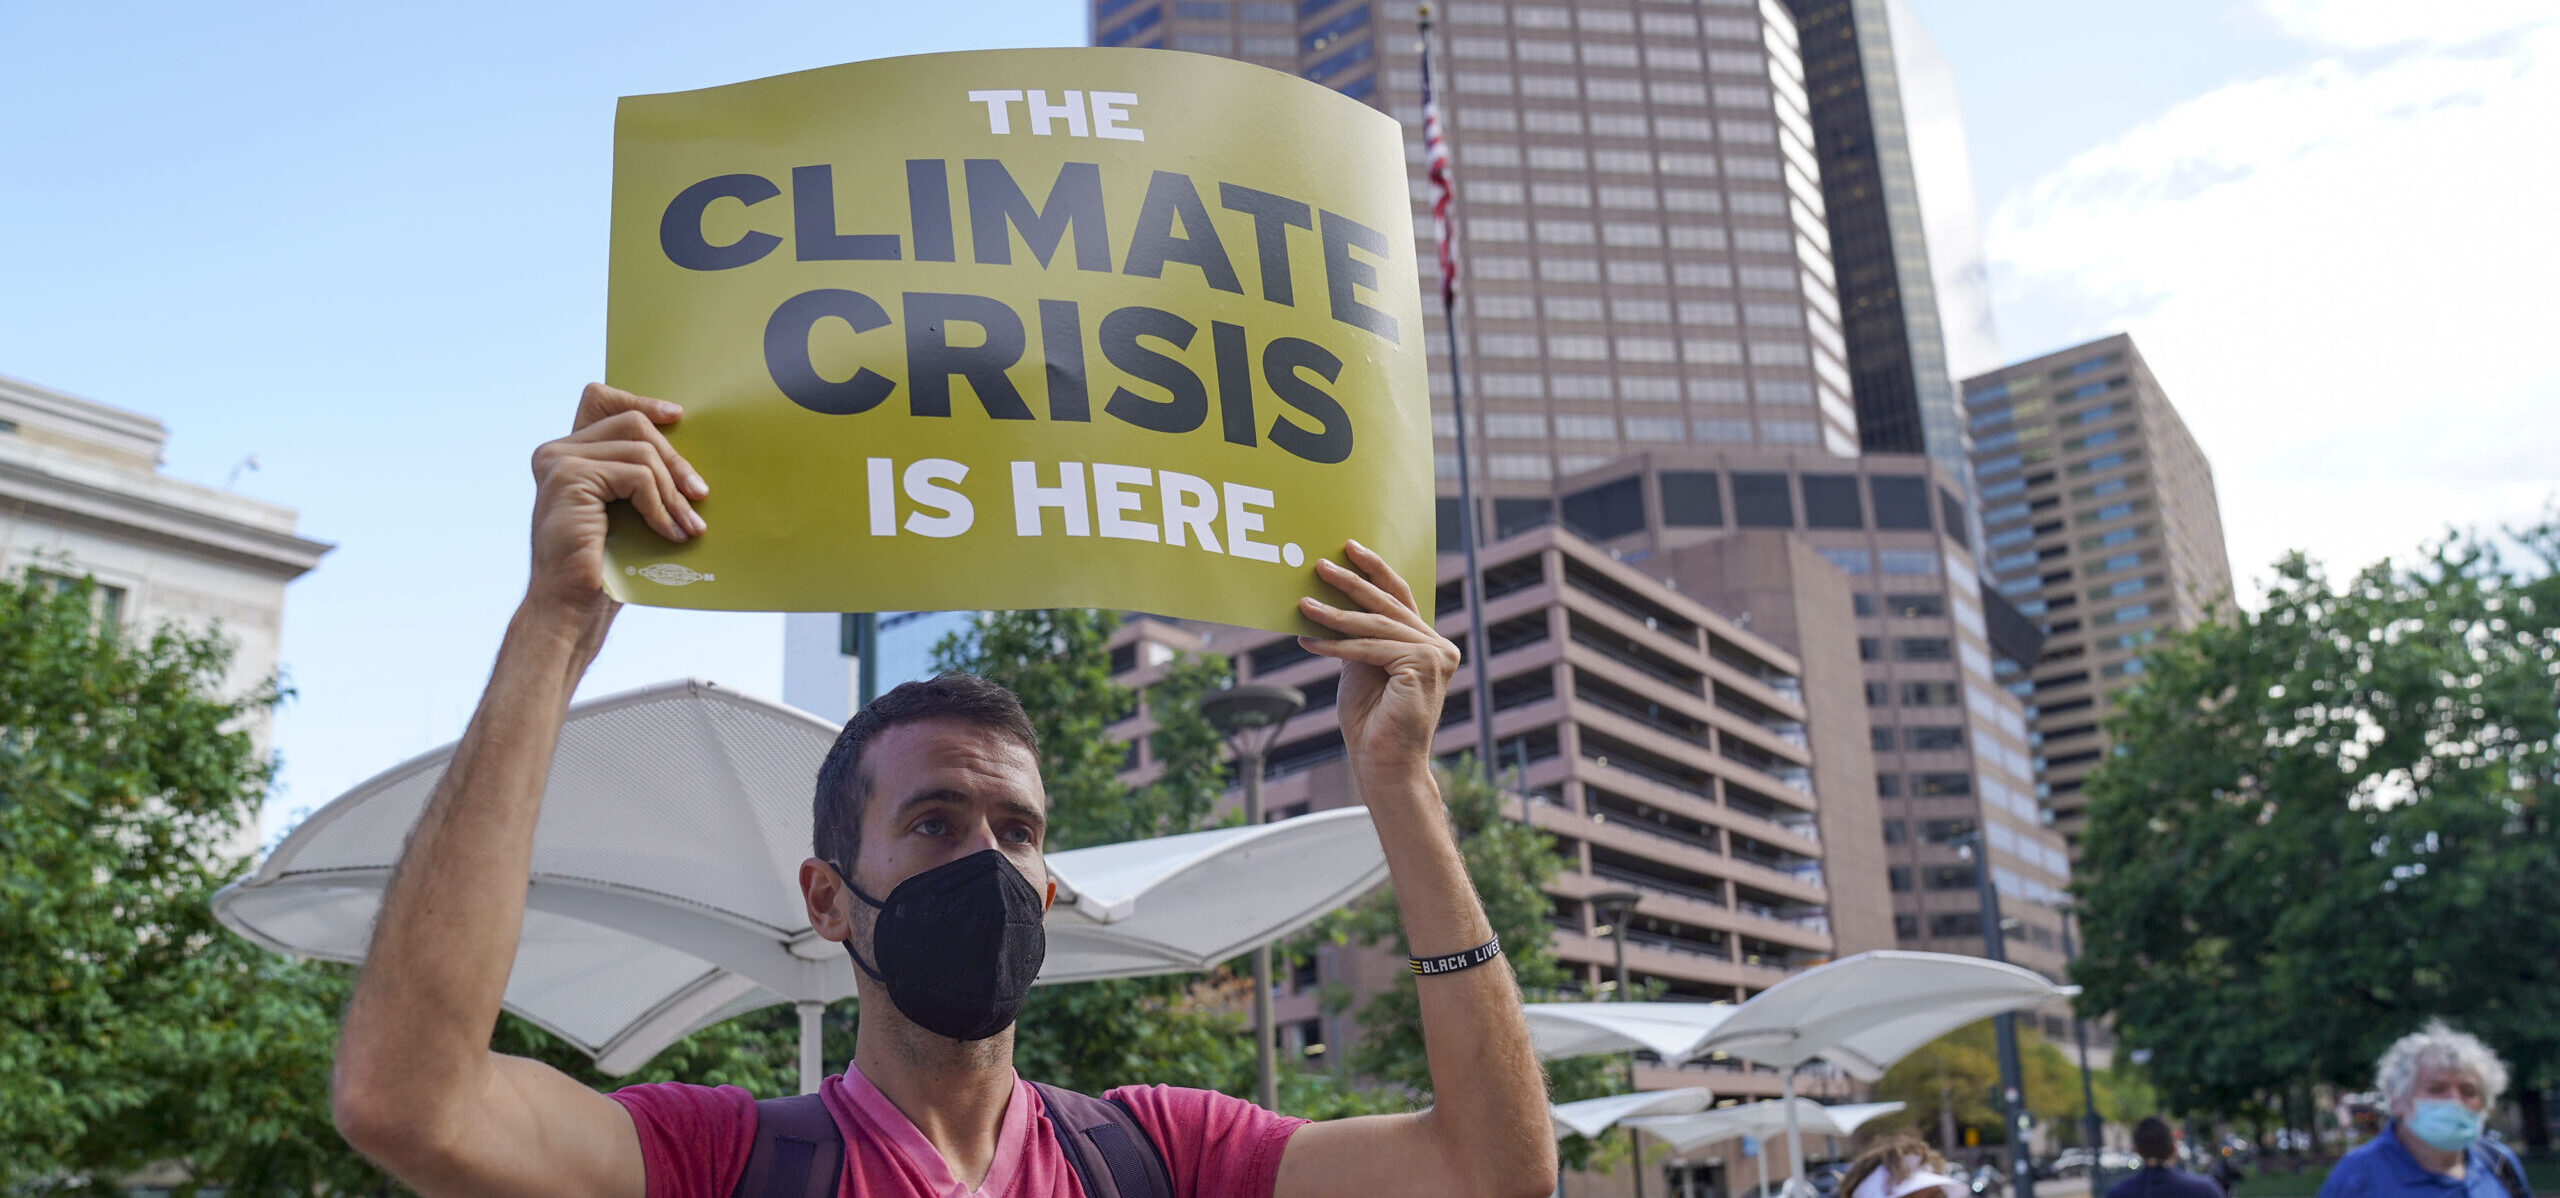 A Colorado Green New Deal organizer holds up a “Climate crisis is here” sign at a rally